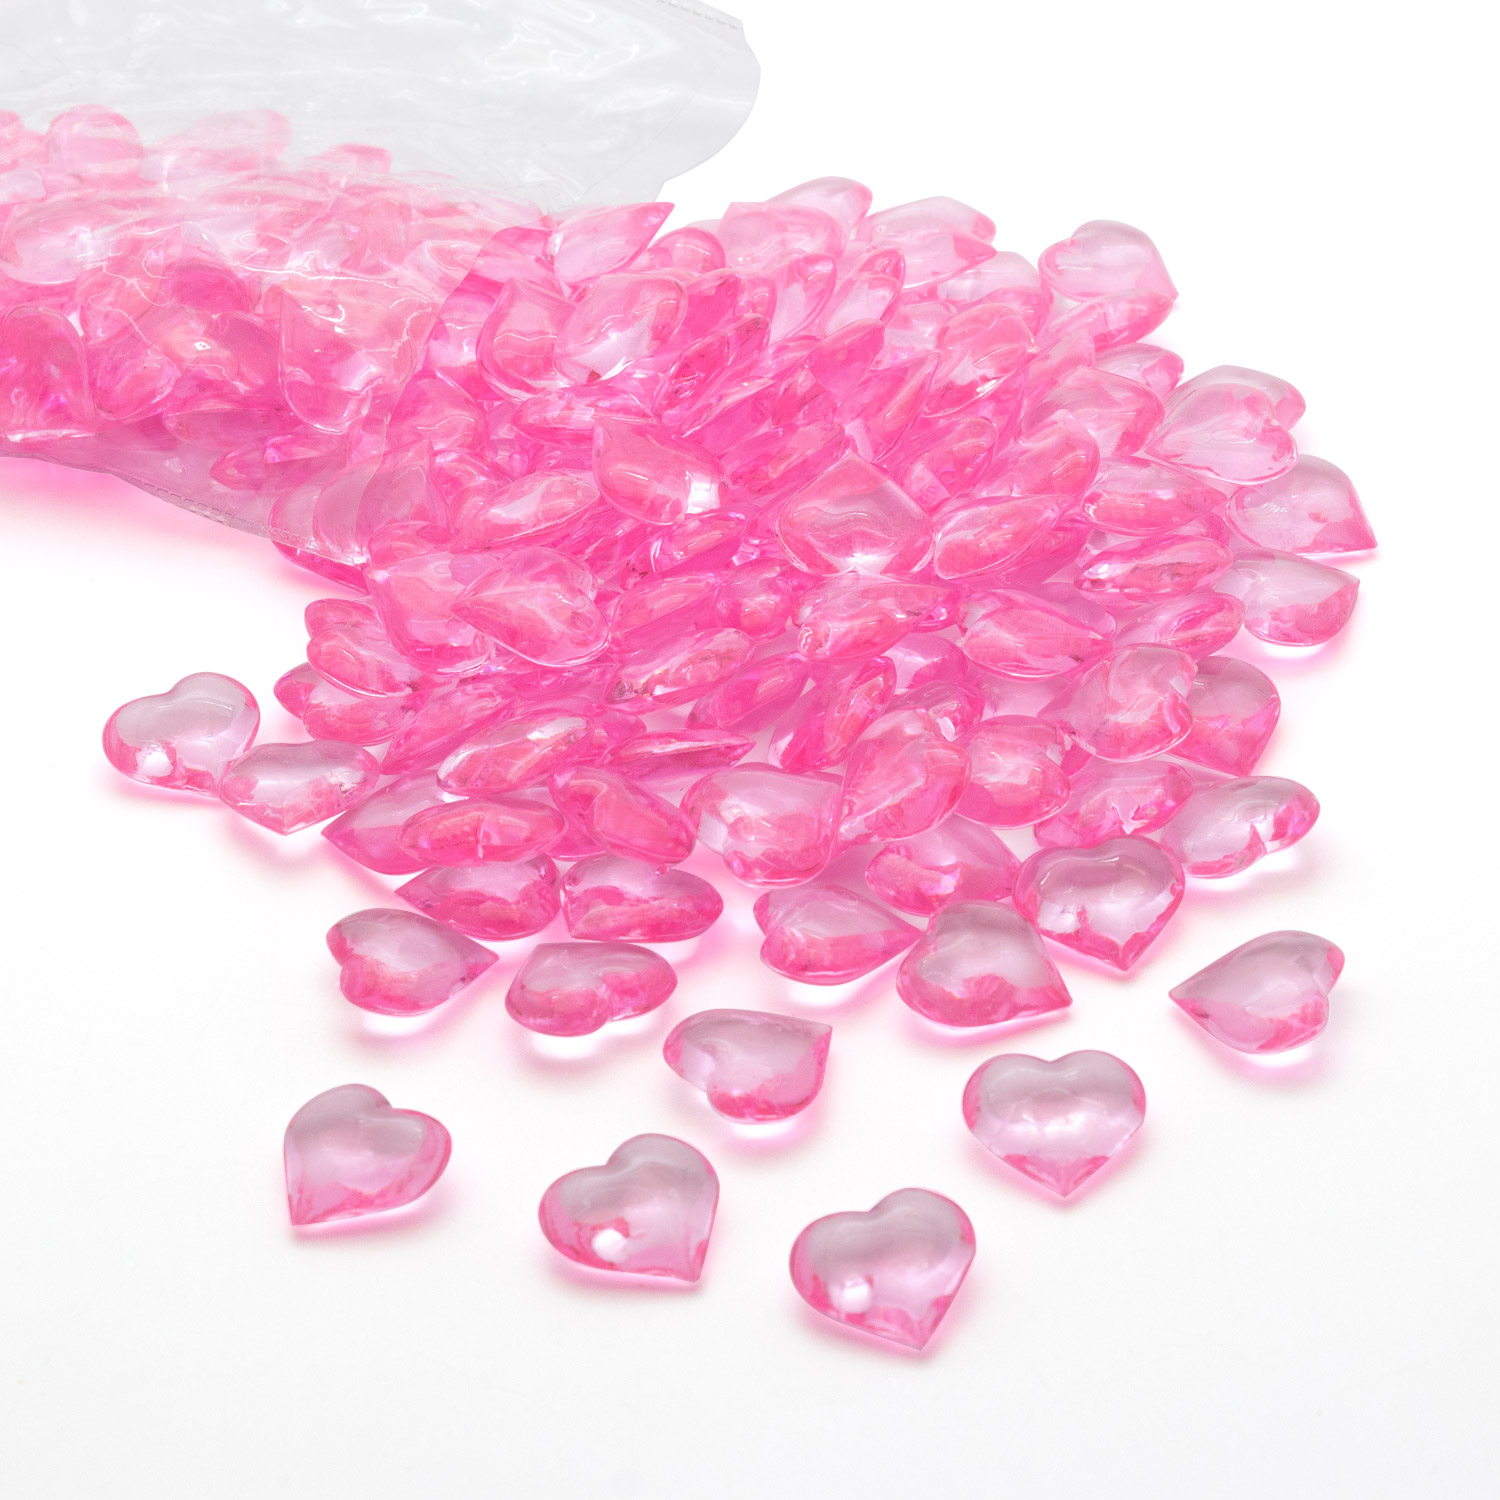 Royal Imports Acrylic Heart Gems Ice Crystal Rocks for Vase Fillers Party Table 